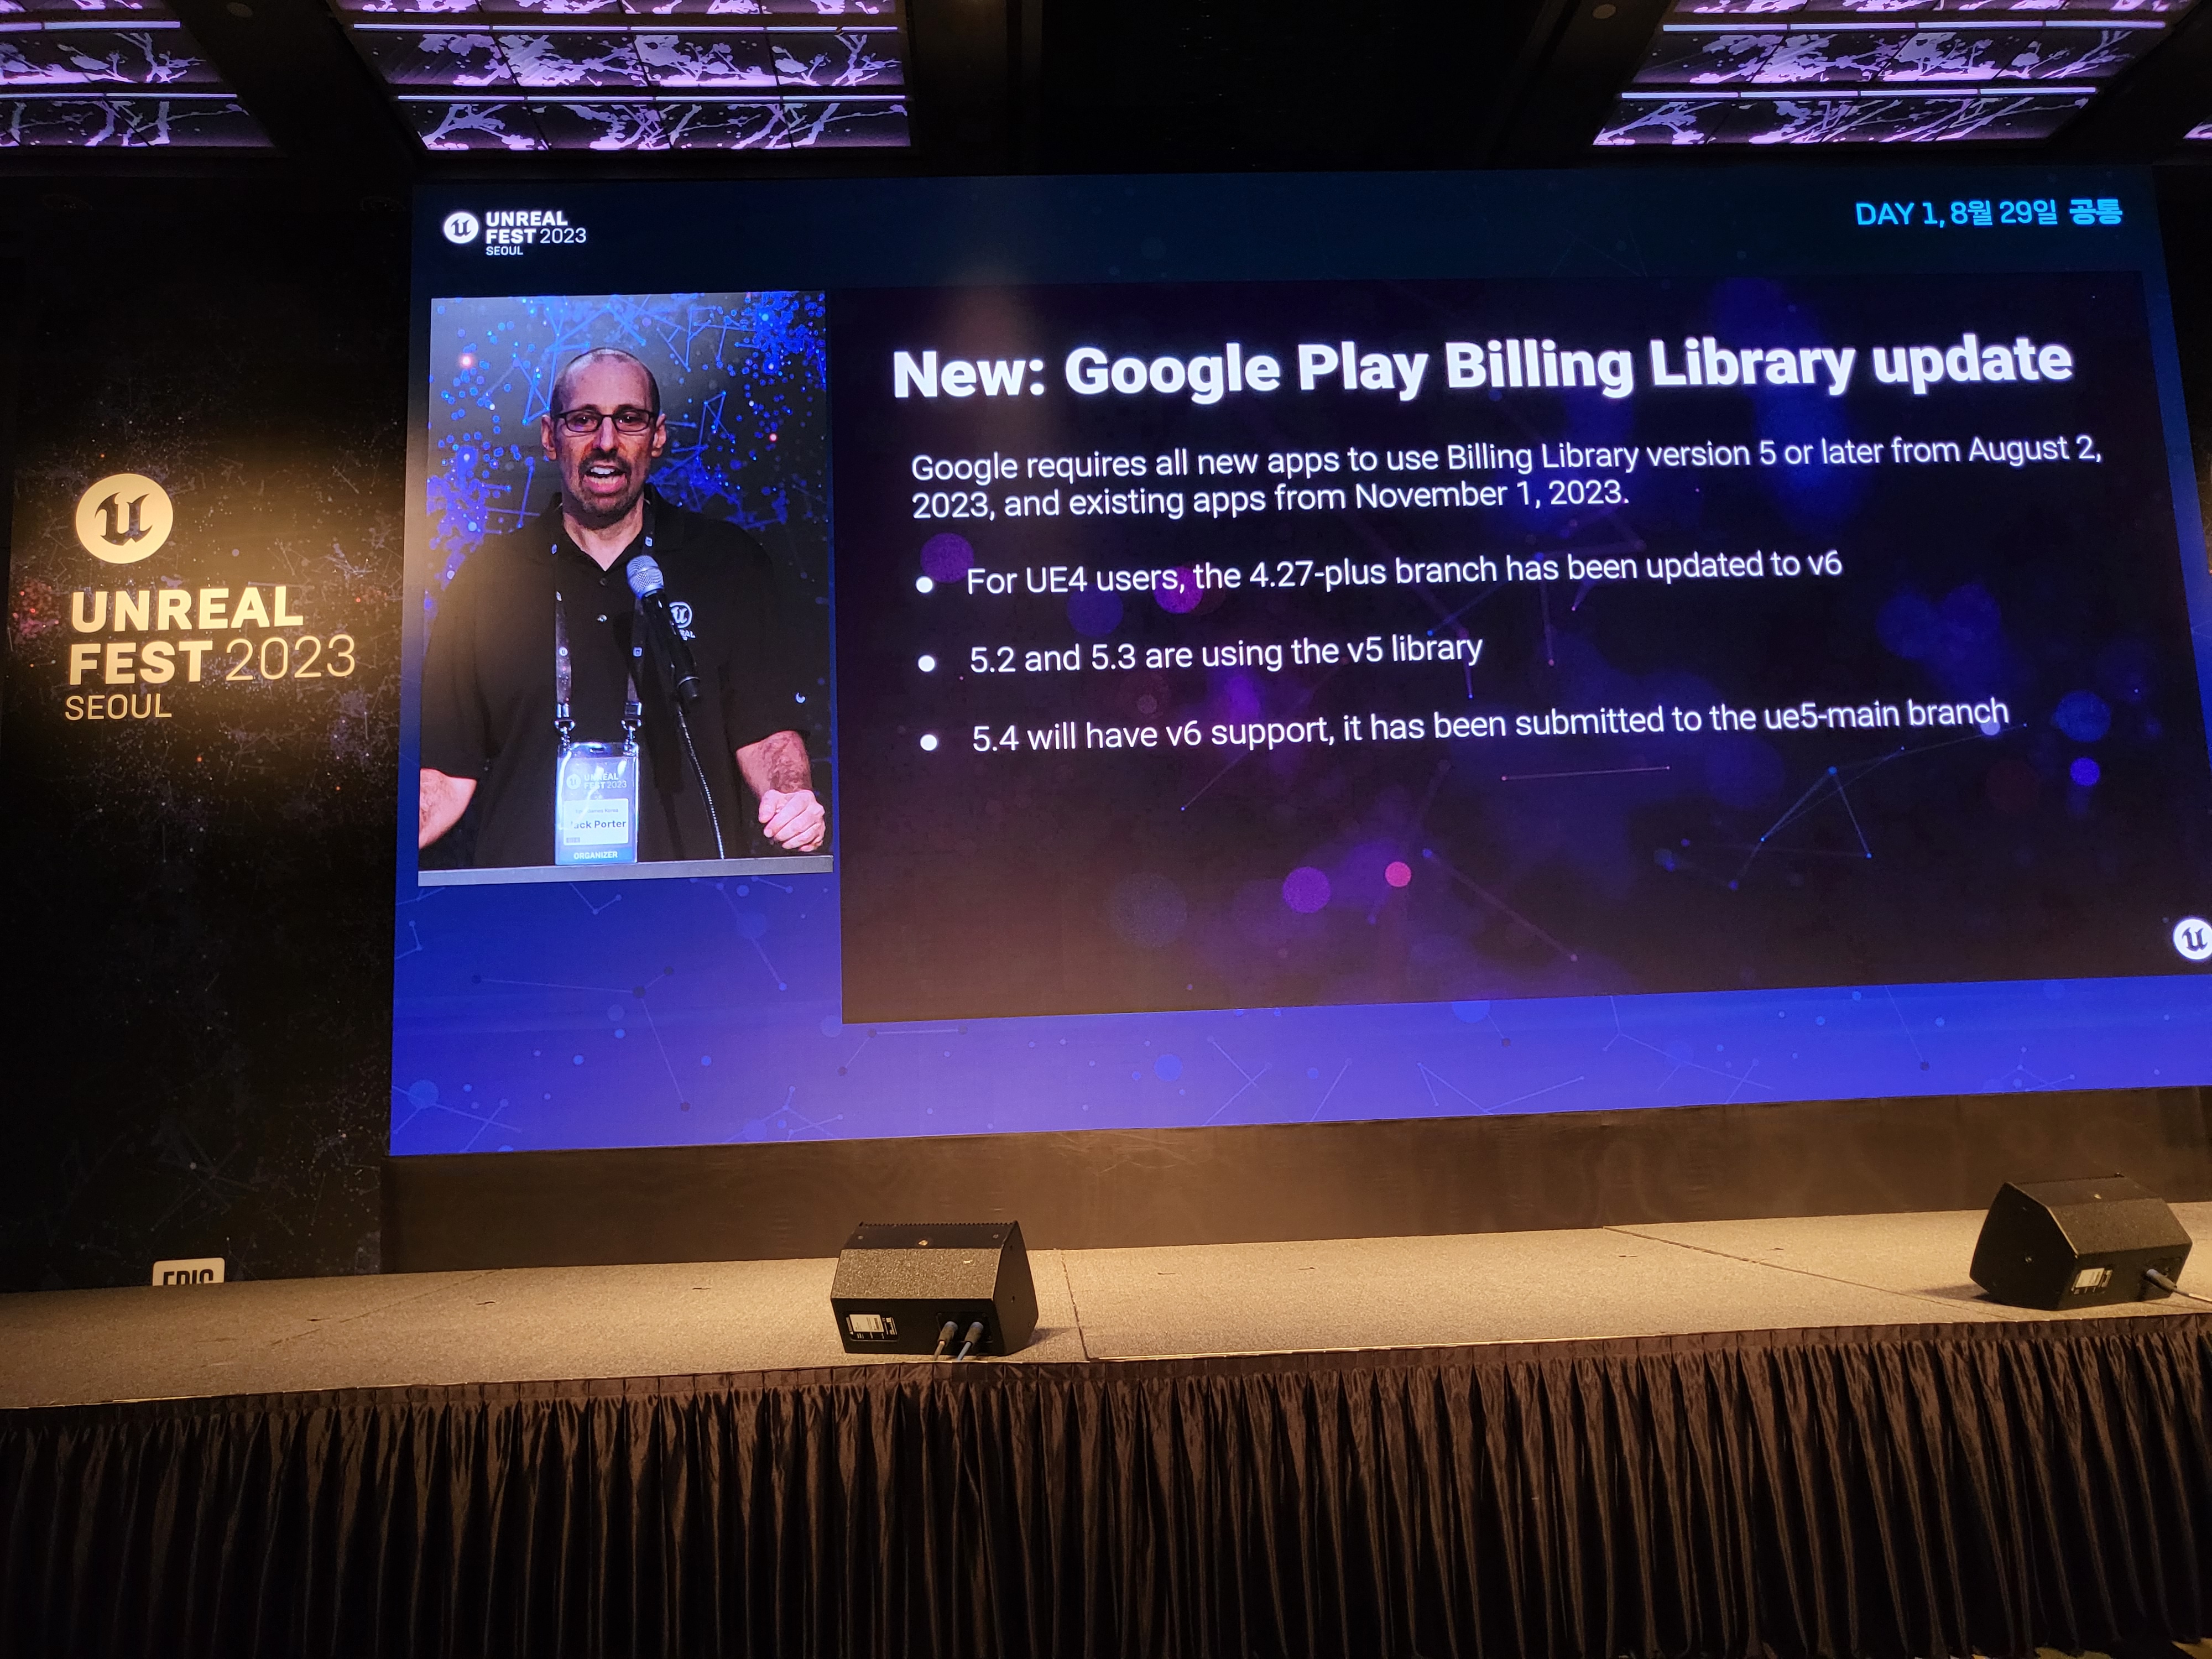 Google Play Billing Library Update